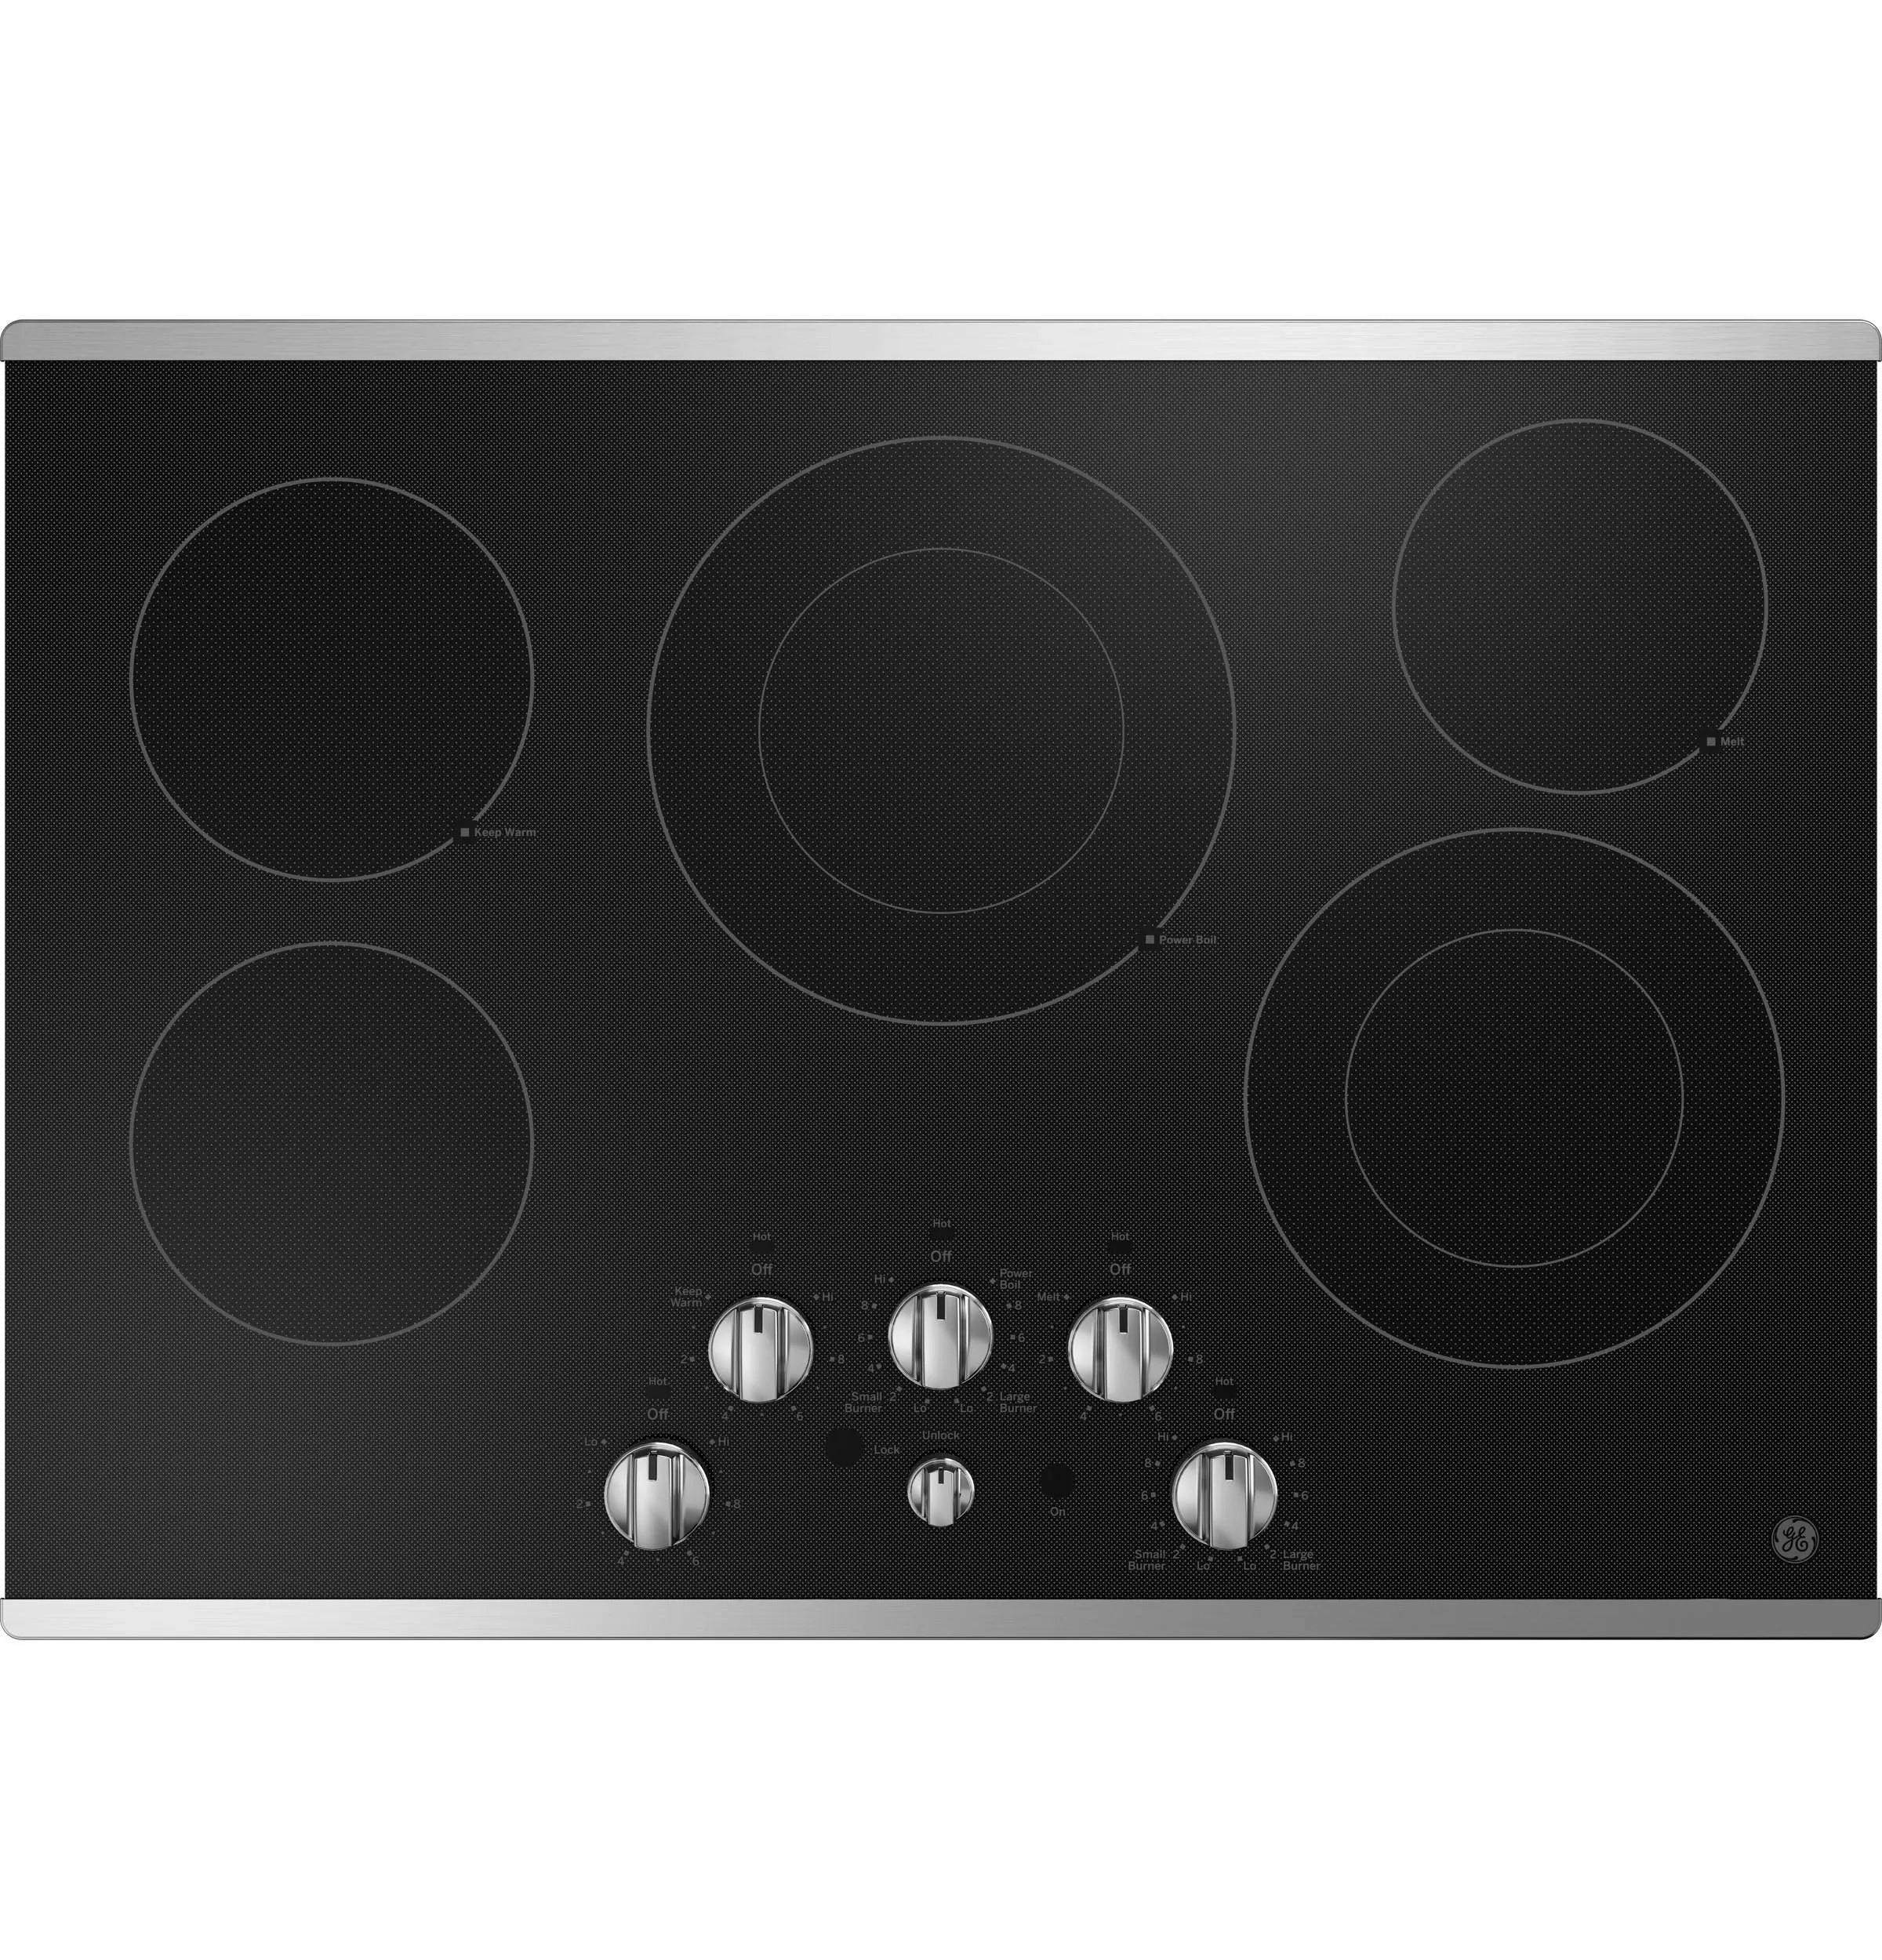 OPEN BOX GE 30-in 5 Element Electric Cooktop and 30-in Smart Single Wall Oven paired with 1.7 Cu Ft Over-the-Range Microwave Suite in Stainless Steel